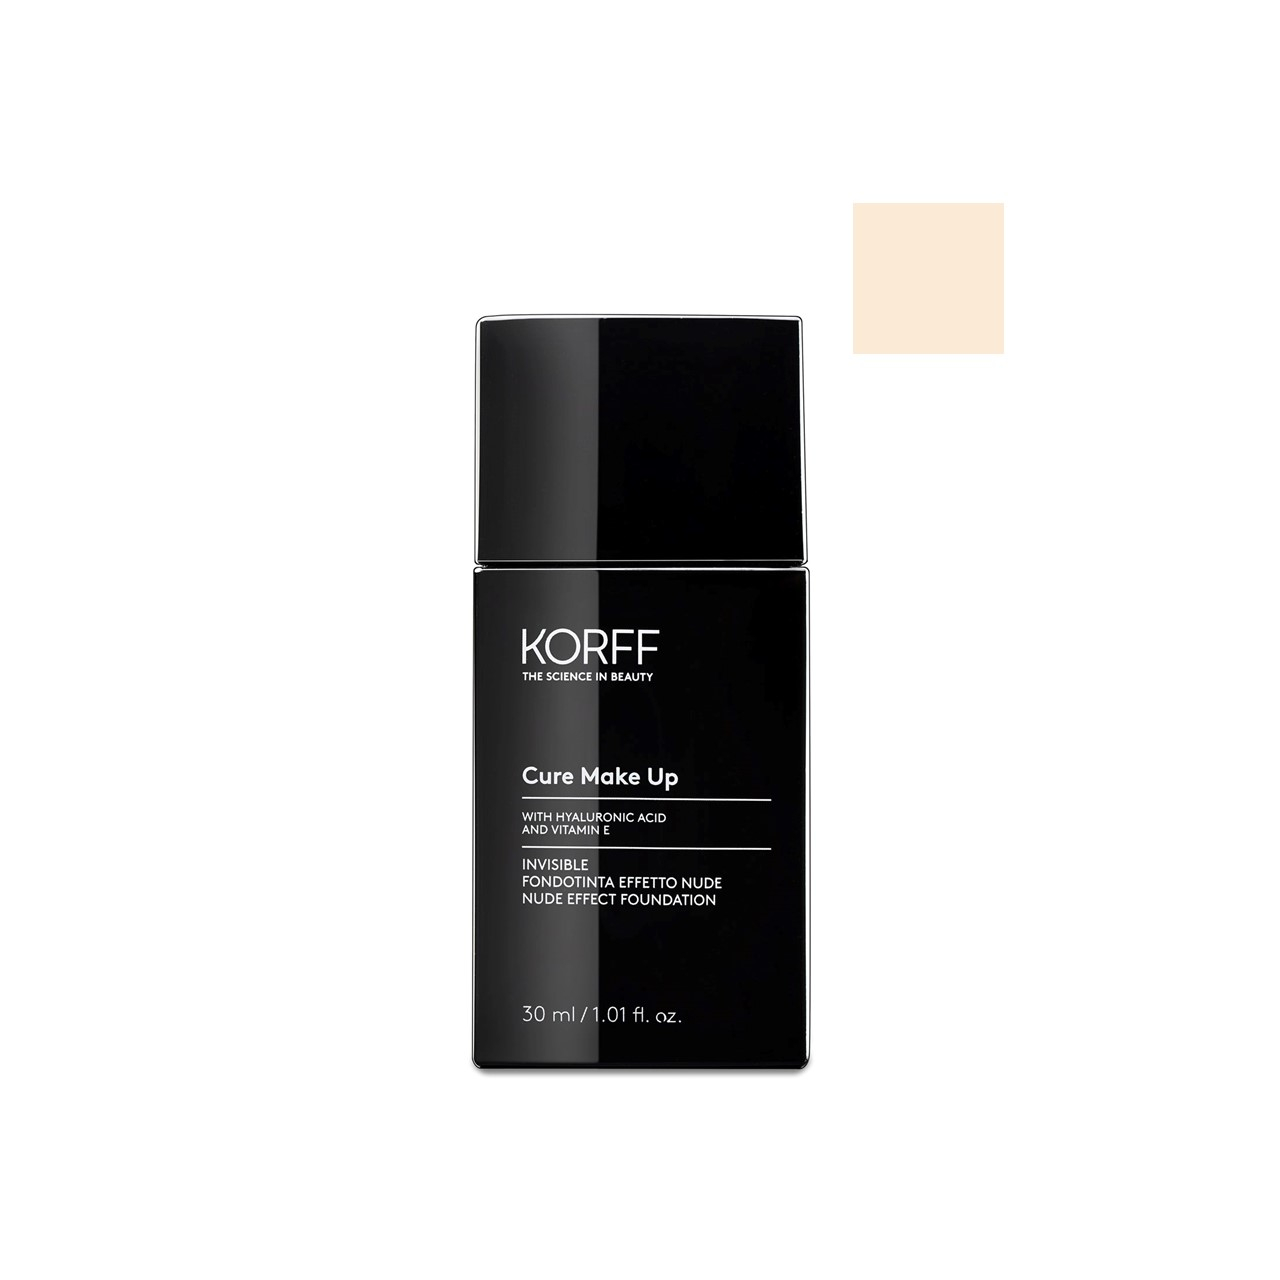 Korff Cure Make-Up Invisible Nude Effect Foundation 01 30ml (1.01 fl oz)